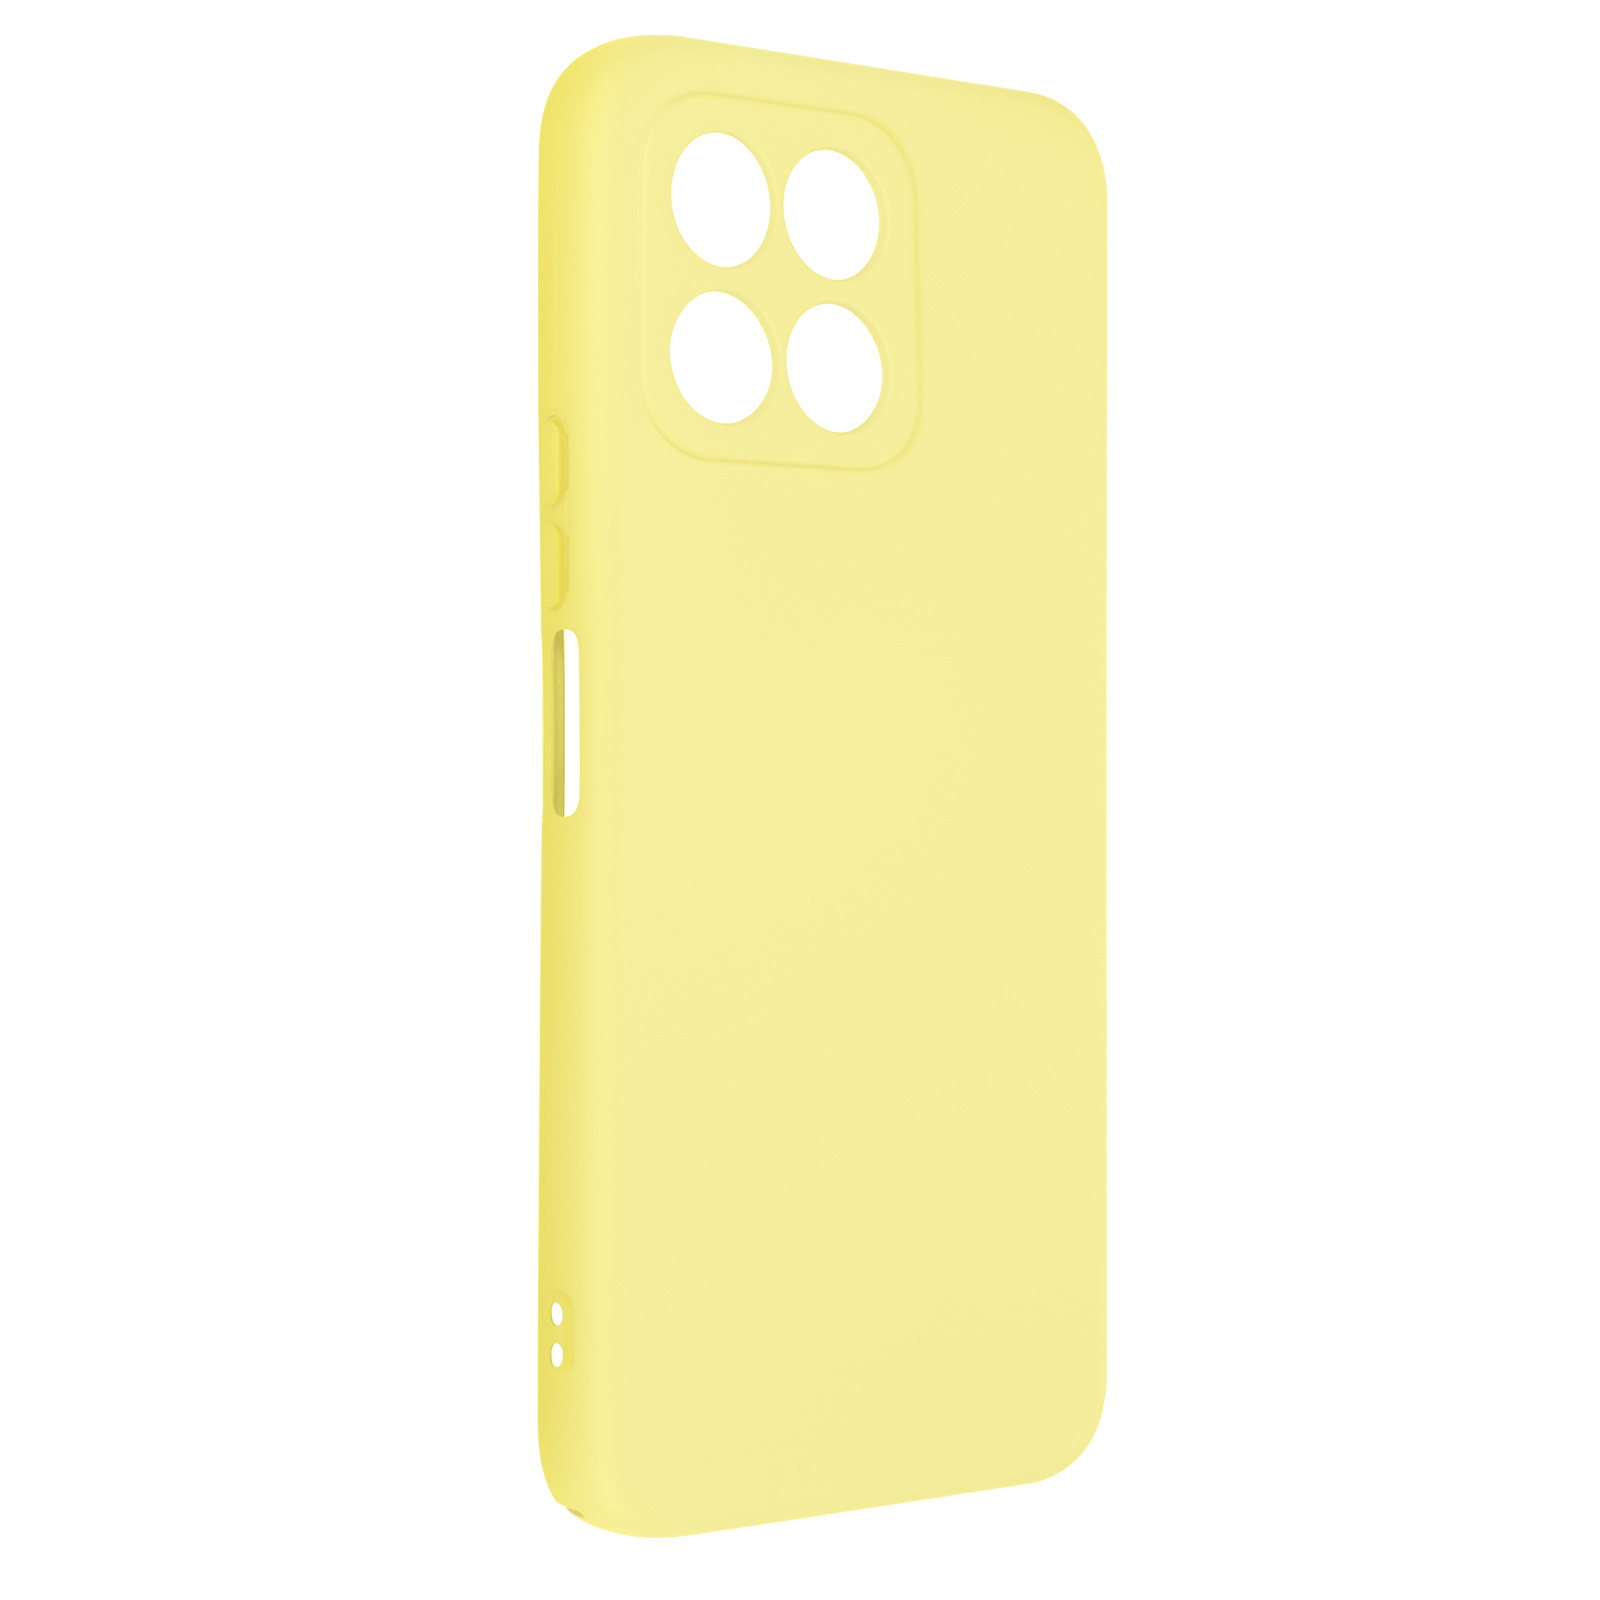 AVIZAR Soft Touch Series, Backcover, Lite, Gelb Honor, 70